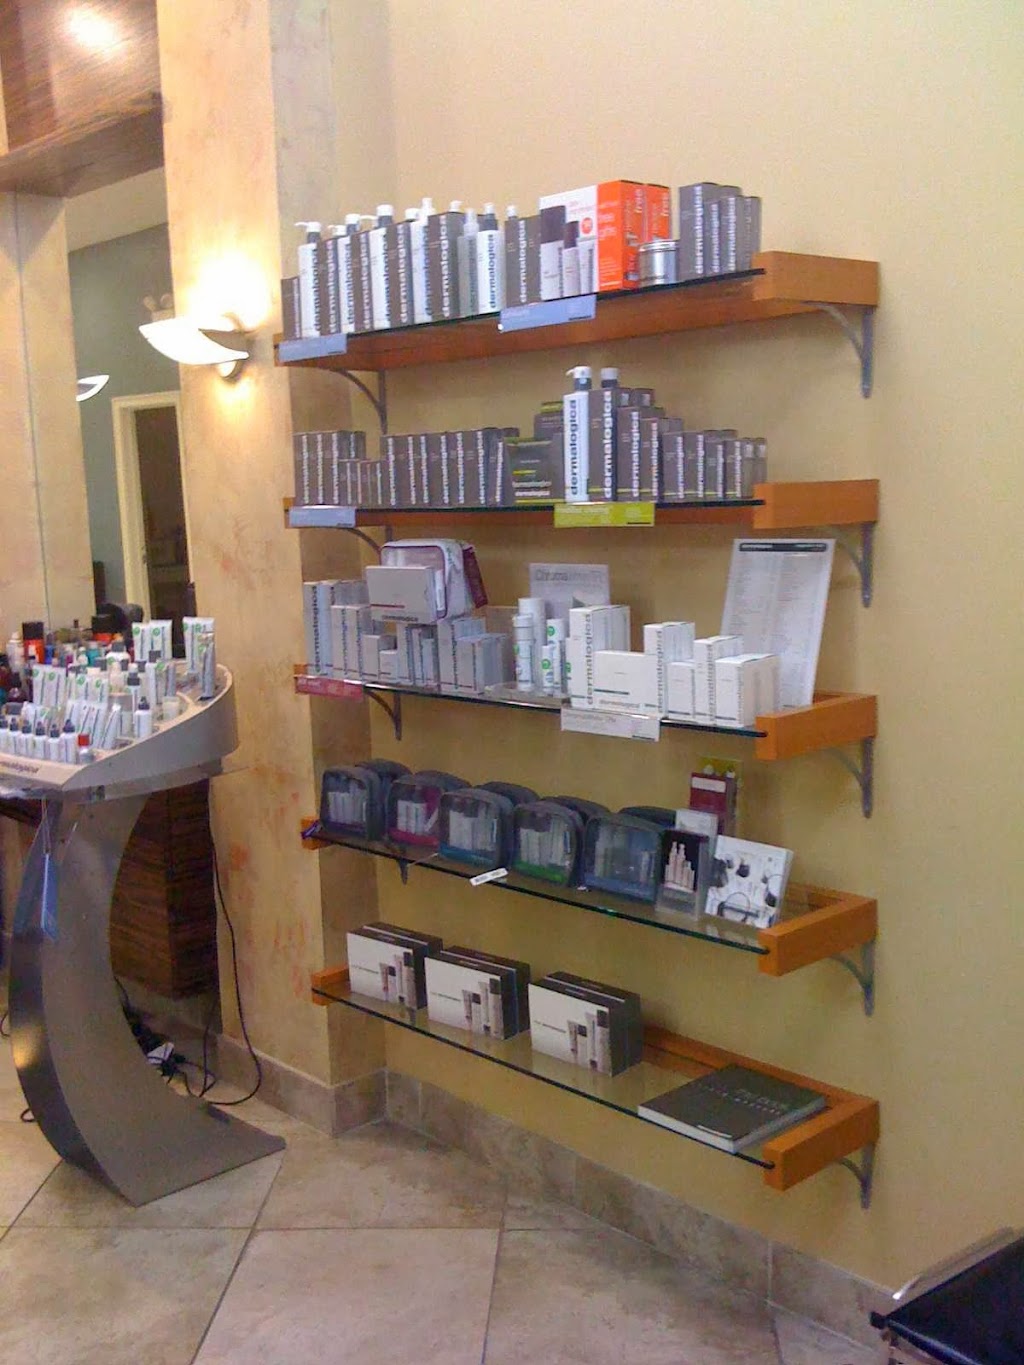 INSTYLE HAIR STUDIO & DAY SPA | 5136 W Irving Park Rd, Chicago, IL 60641 | Phone: (773) 282-5323